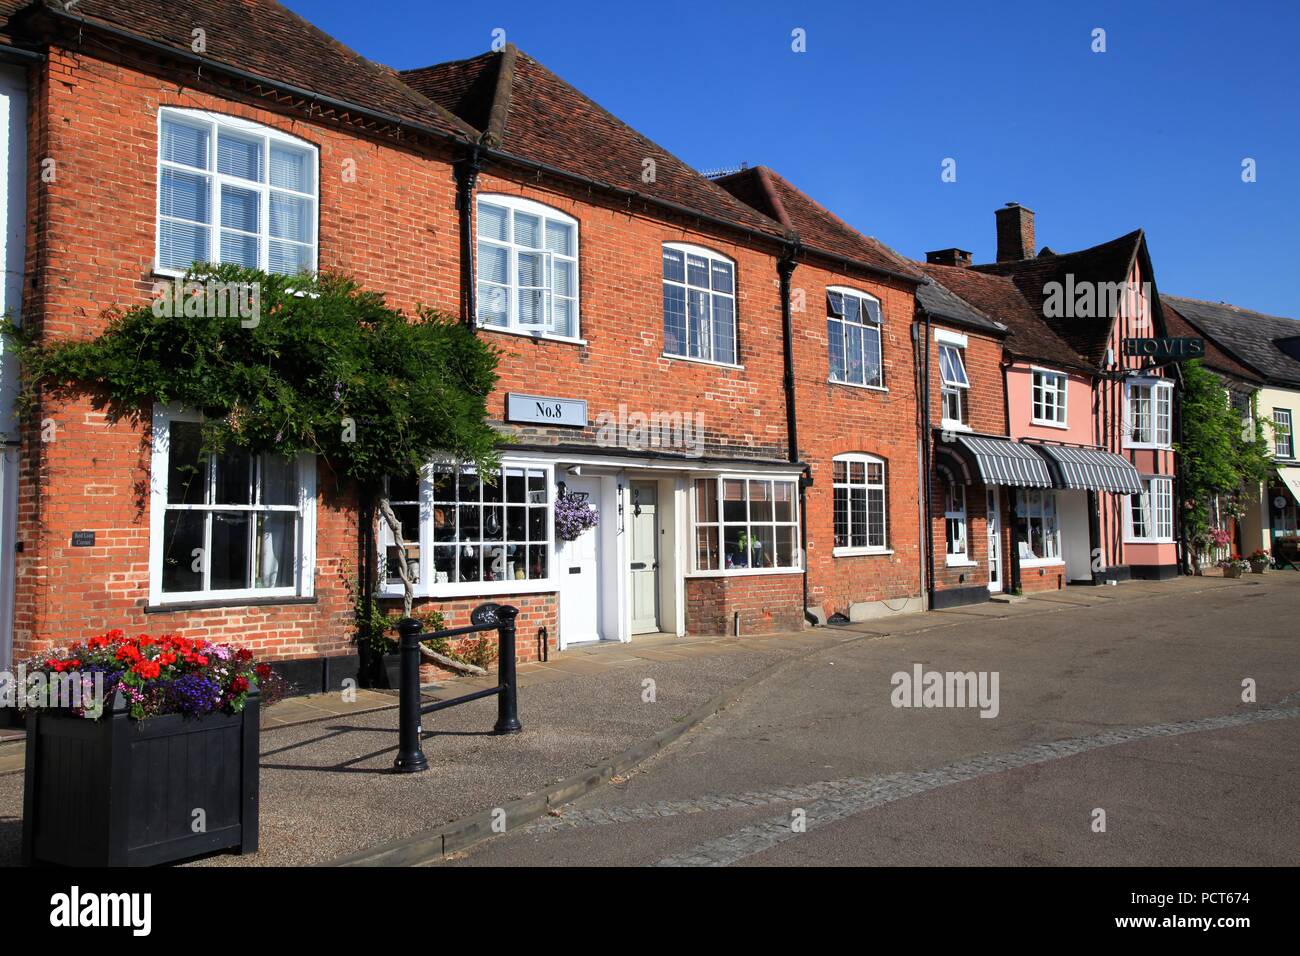 Half timbered Medieval buildings in Lavenham Suffolk UK Stock Photo